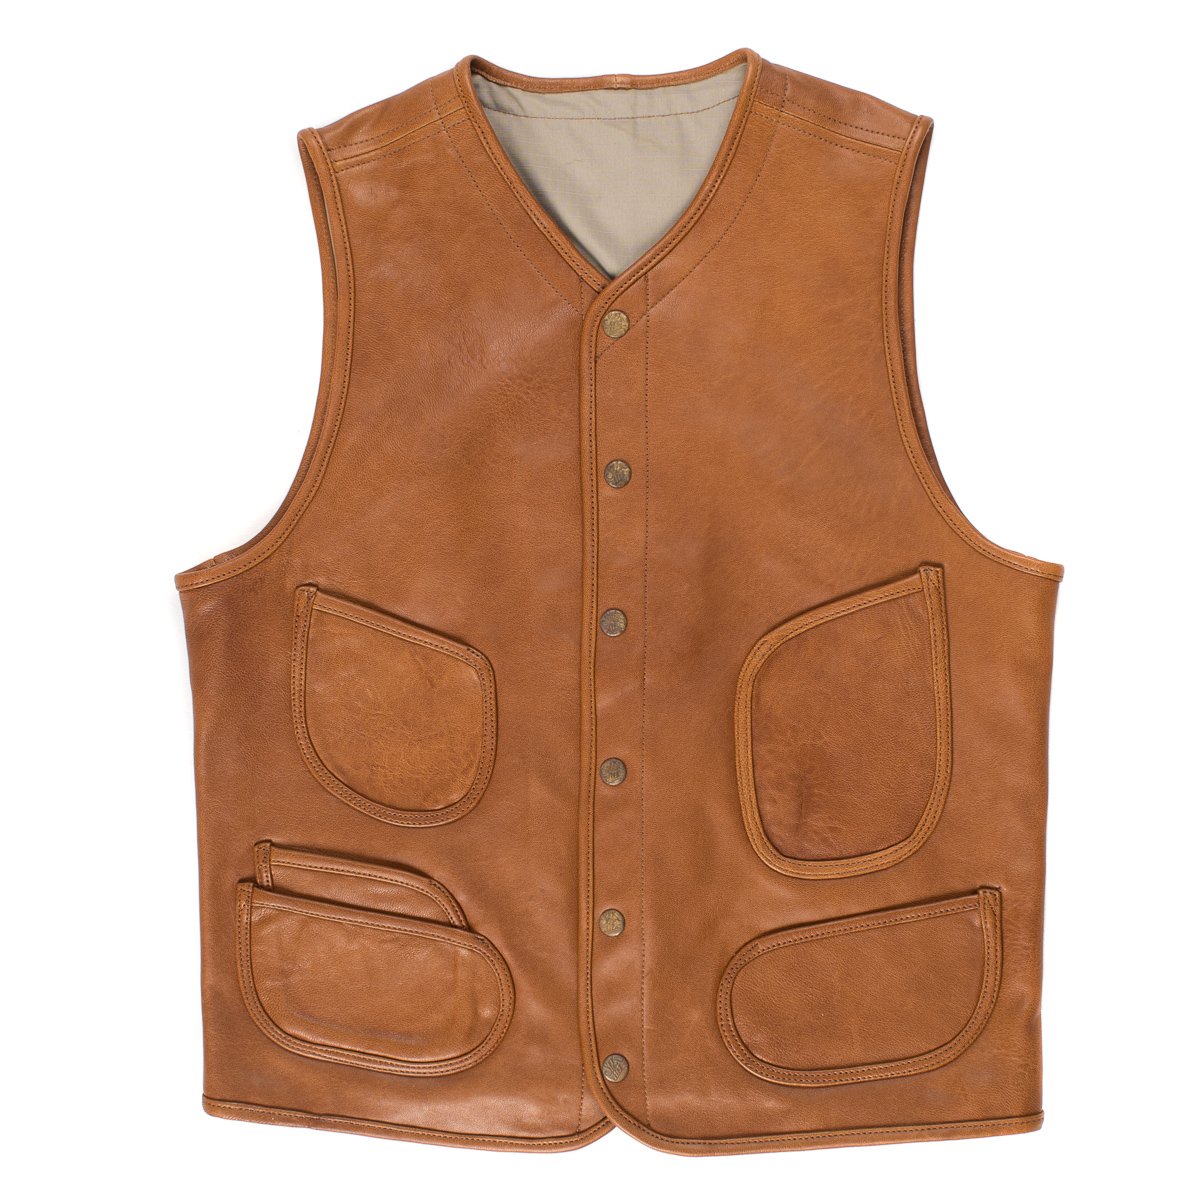 Leather vests | The Fedora Lounge